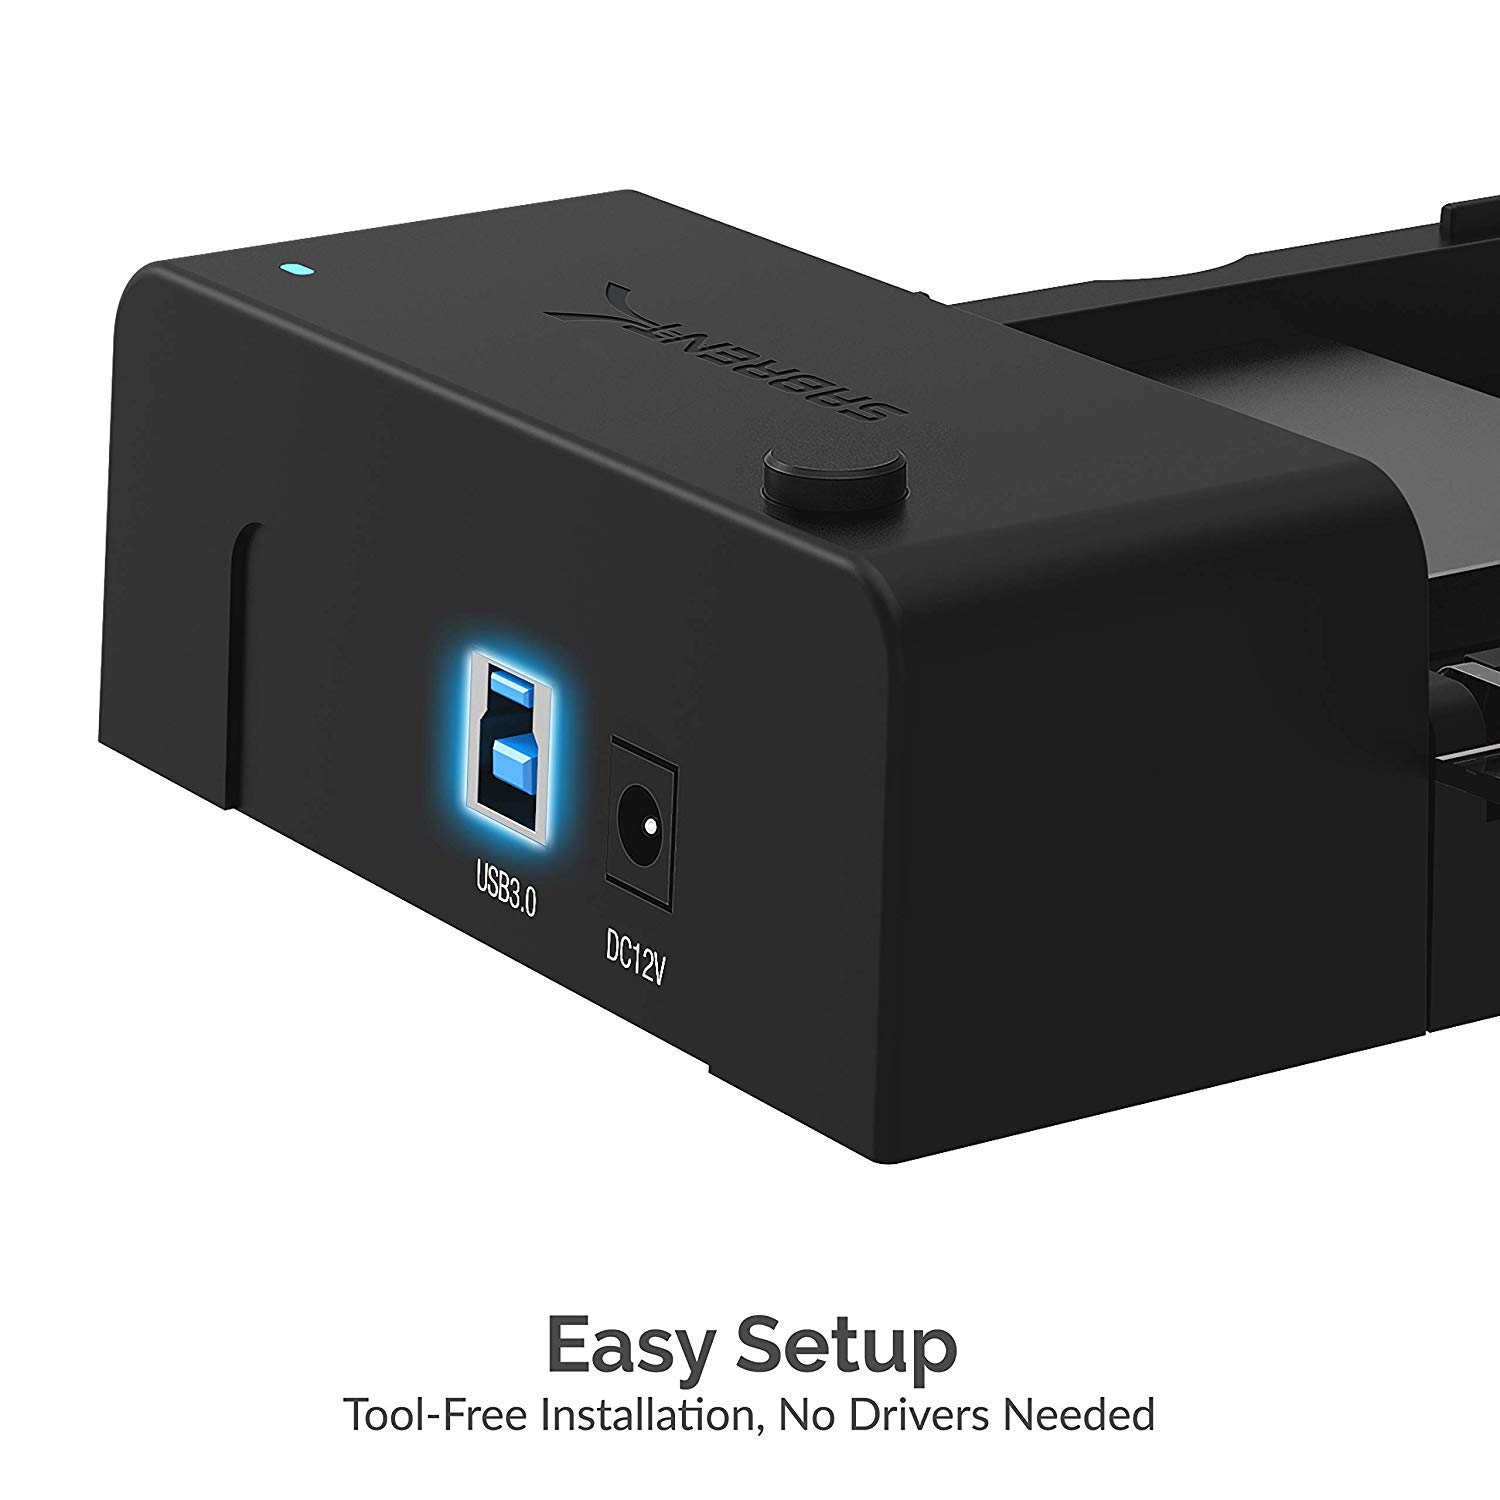 SABRENT USB 3.0 to SATA External Hard Drive Lay Flat Docking Station with Built in Cooling Fan for 2.5 or 3.5in HDD, SSD [Support UASP and 22TB] (EC-DFFN)